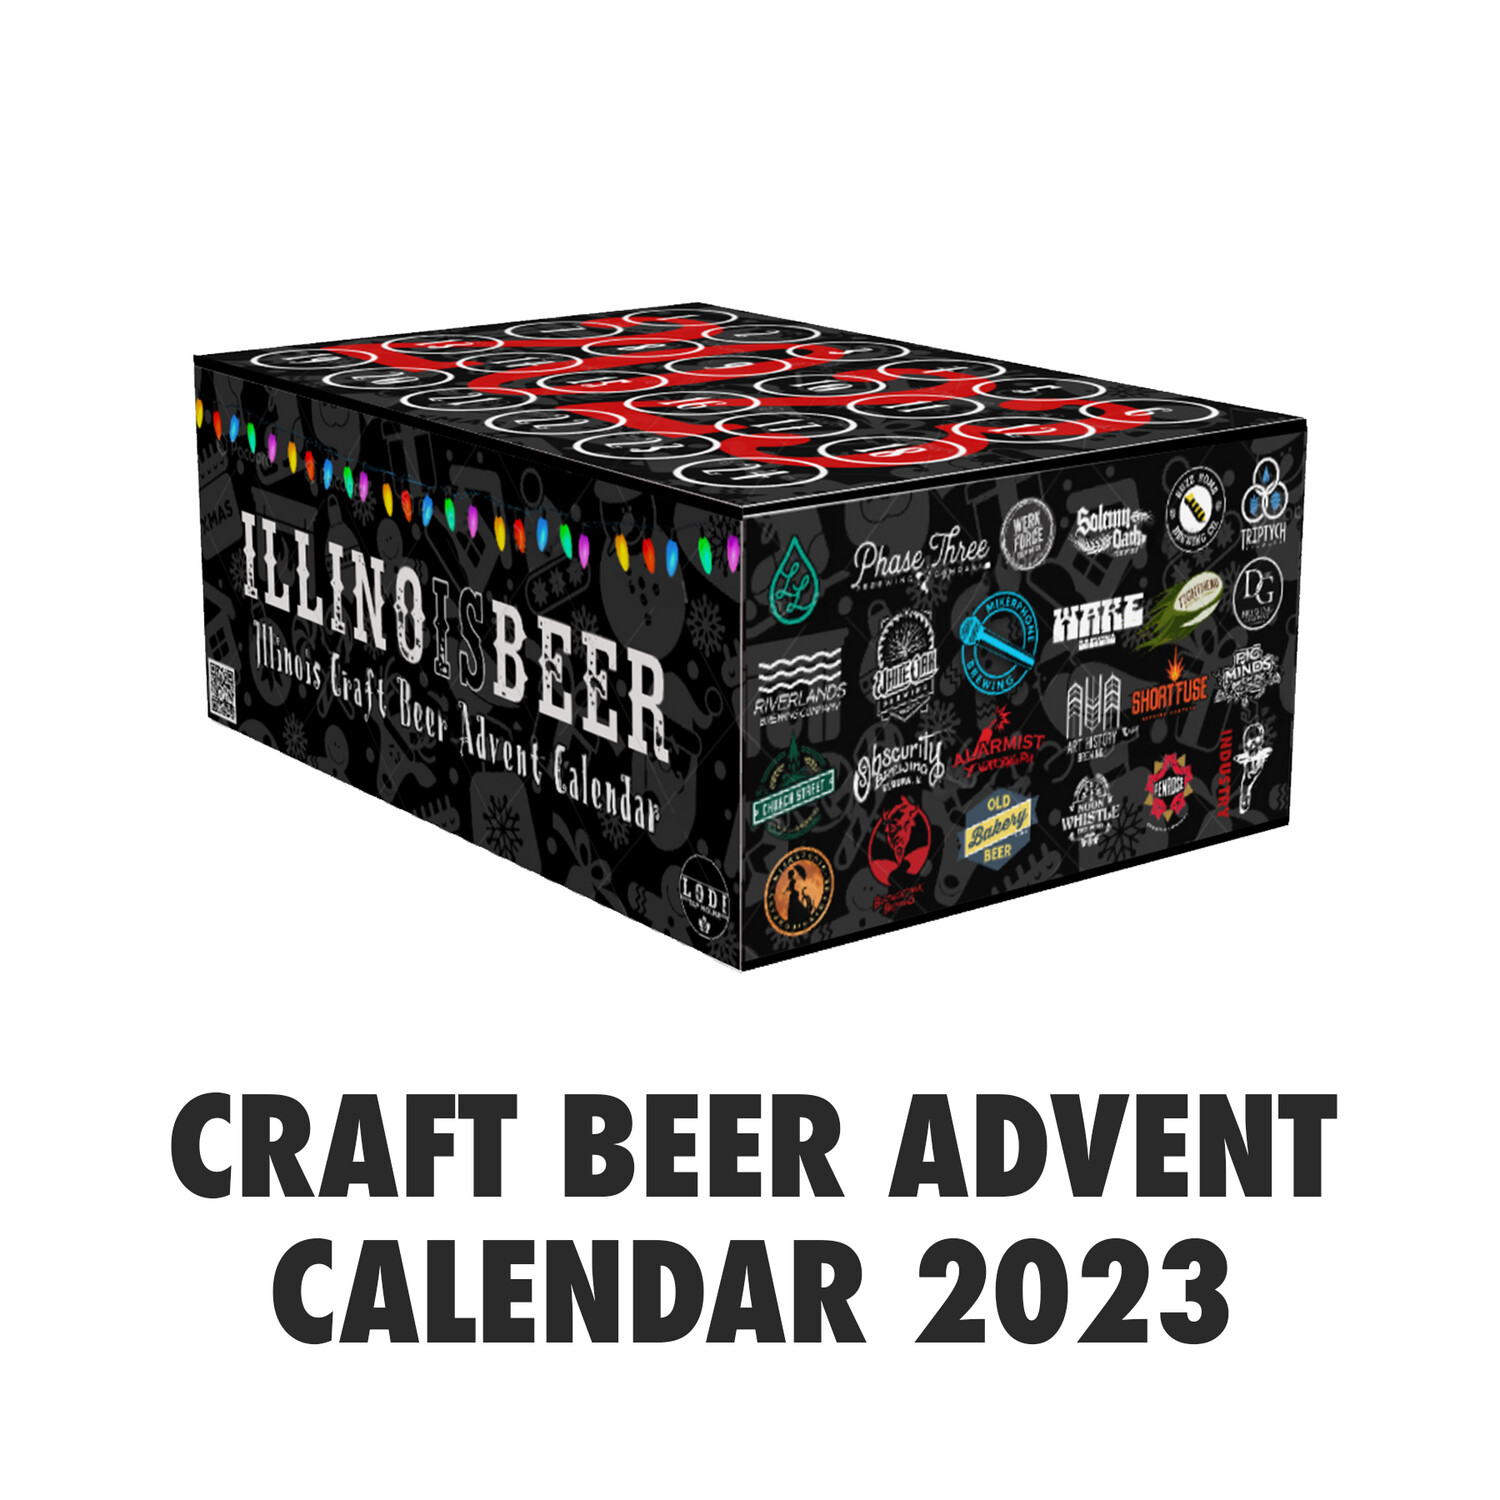 Craft Beer Advent Calendar 2023 by Lodi Tap House